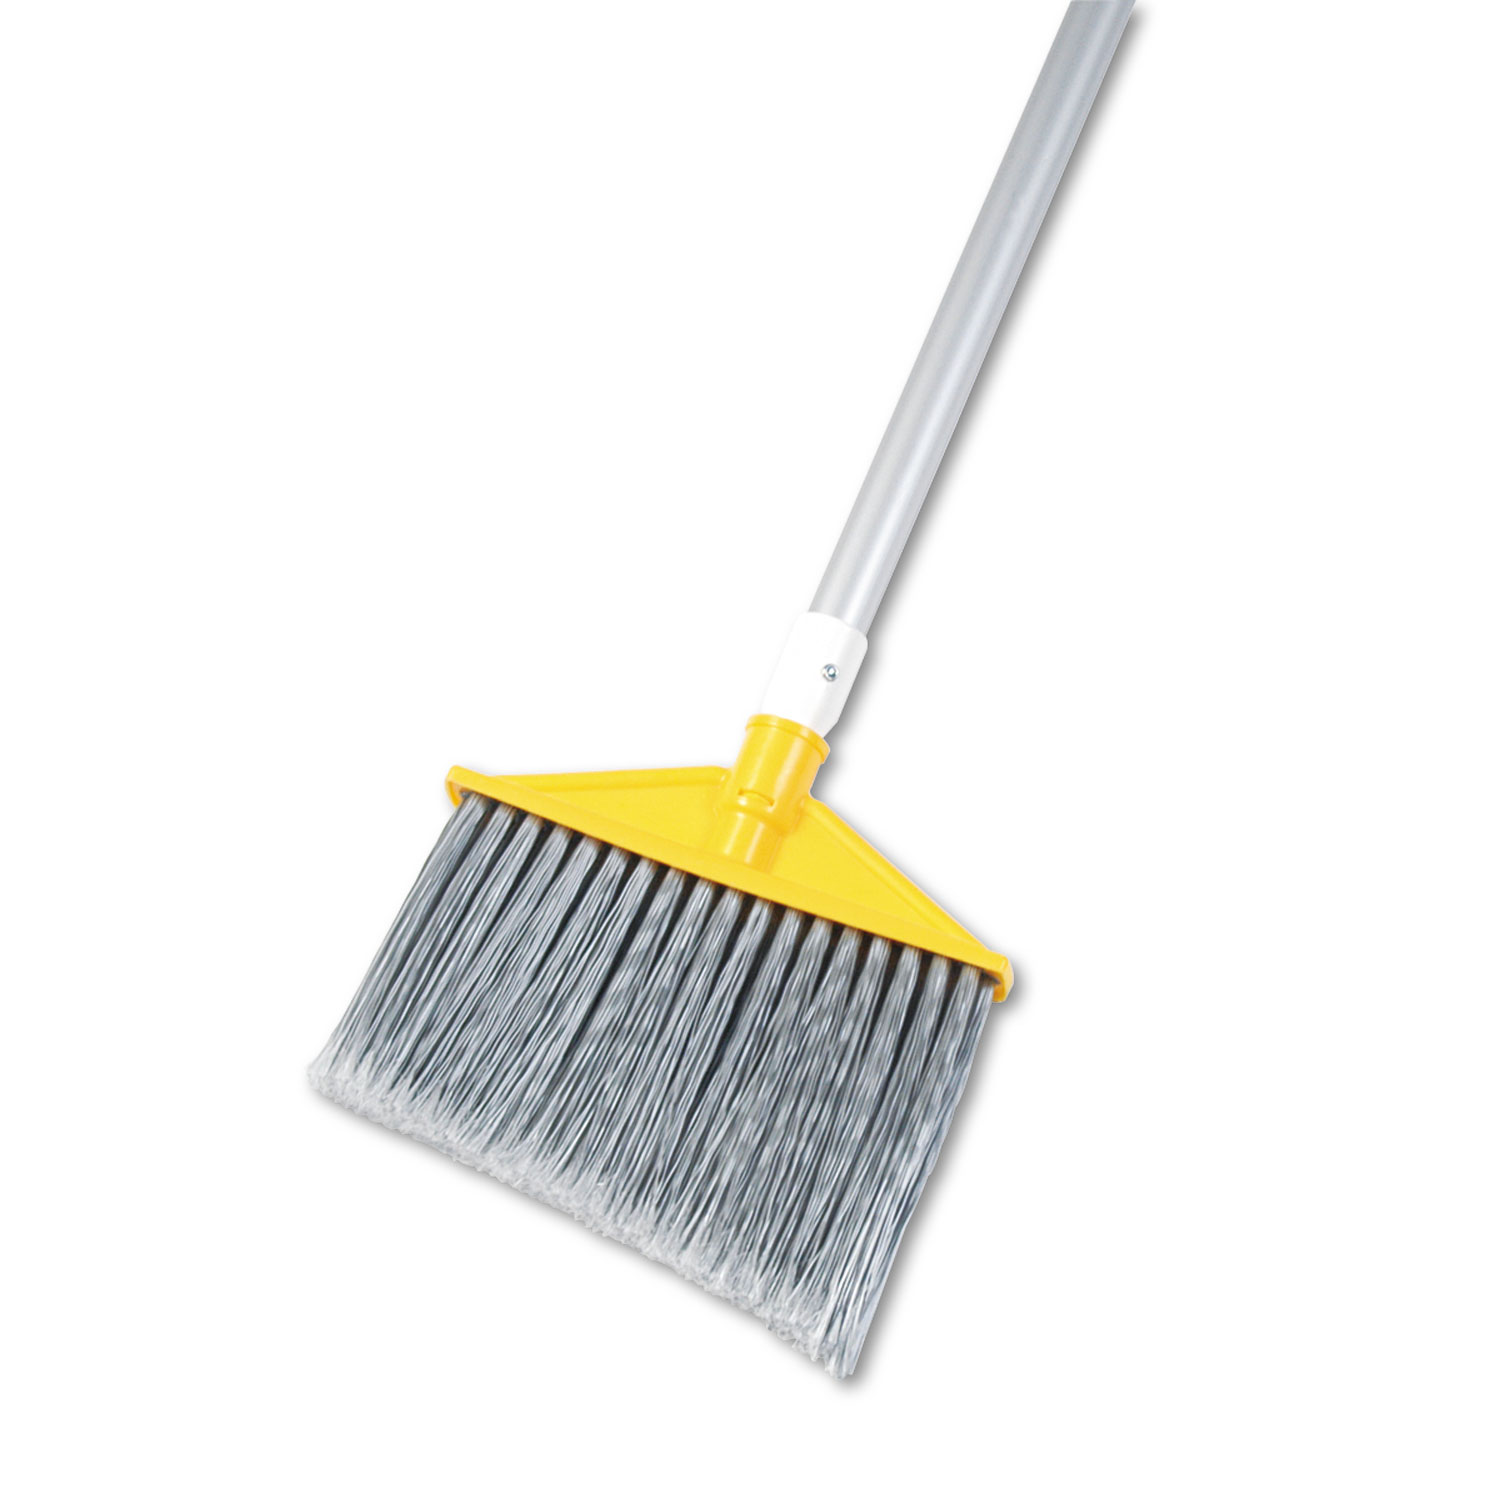  Rubbermaid Commercial FG638500GRAY Angled Large Brooms, Poly Bristles, 48 7/8 Aluminum Handle, Silver/Gray (RCP6385GRA) 